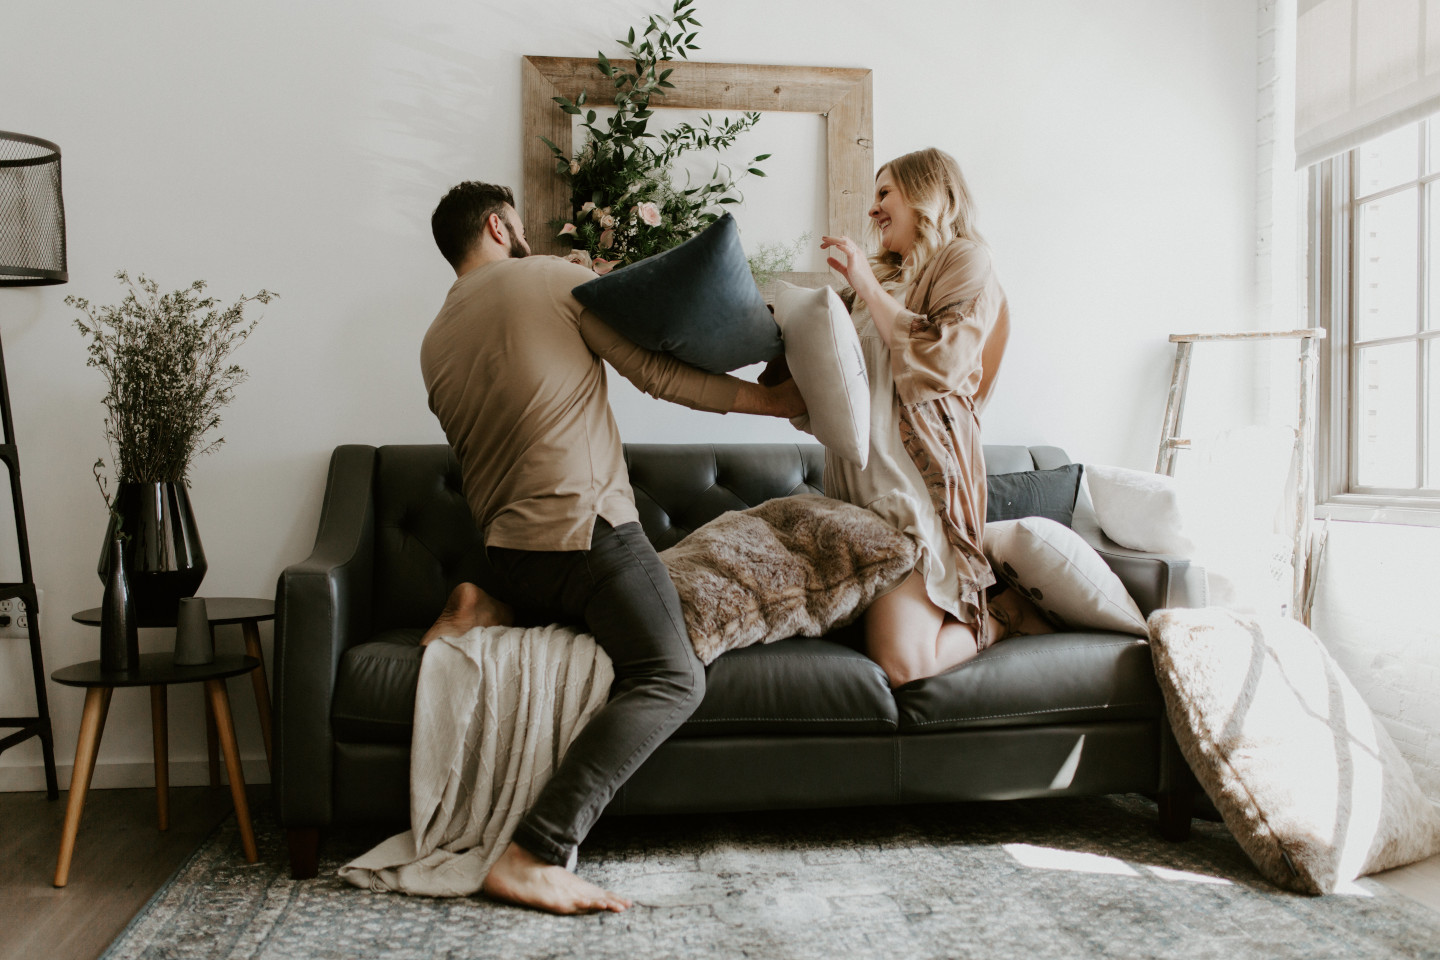 Trevor and Abigail pillow fight on a couch. Lifestyle photography in Portland Oregon by Sienna Plus Josh.